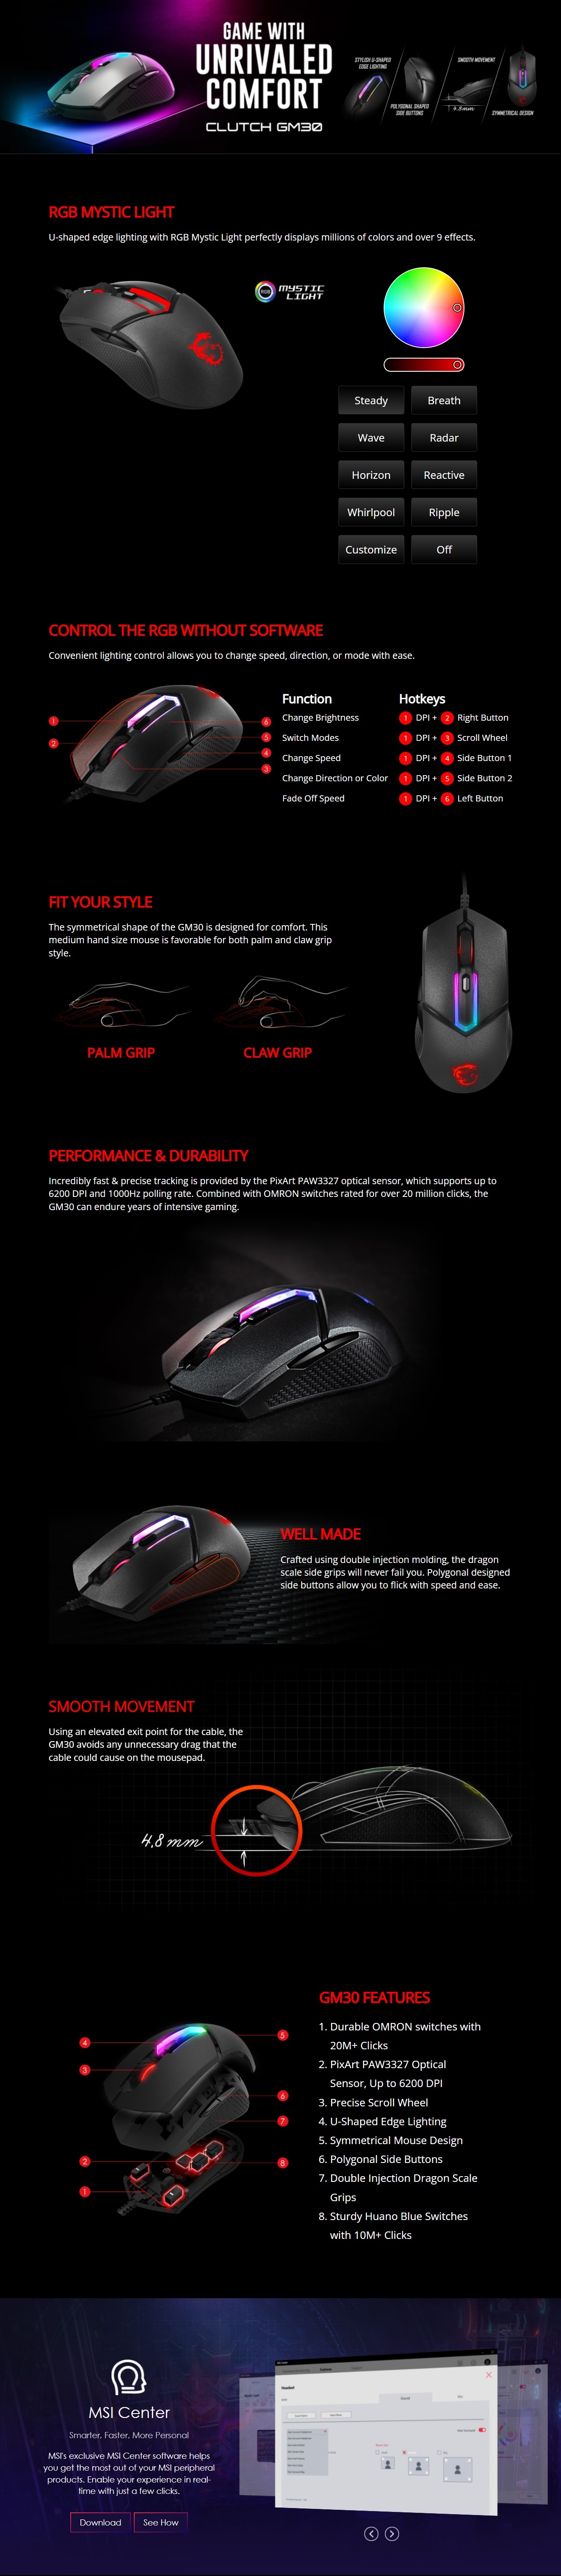 A large marketing image providing additional information about the product MSI Clutch GM30 RGB Gaming Mouse - Additional alt info not provided